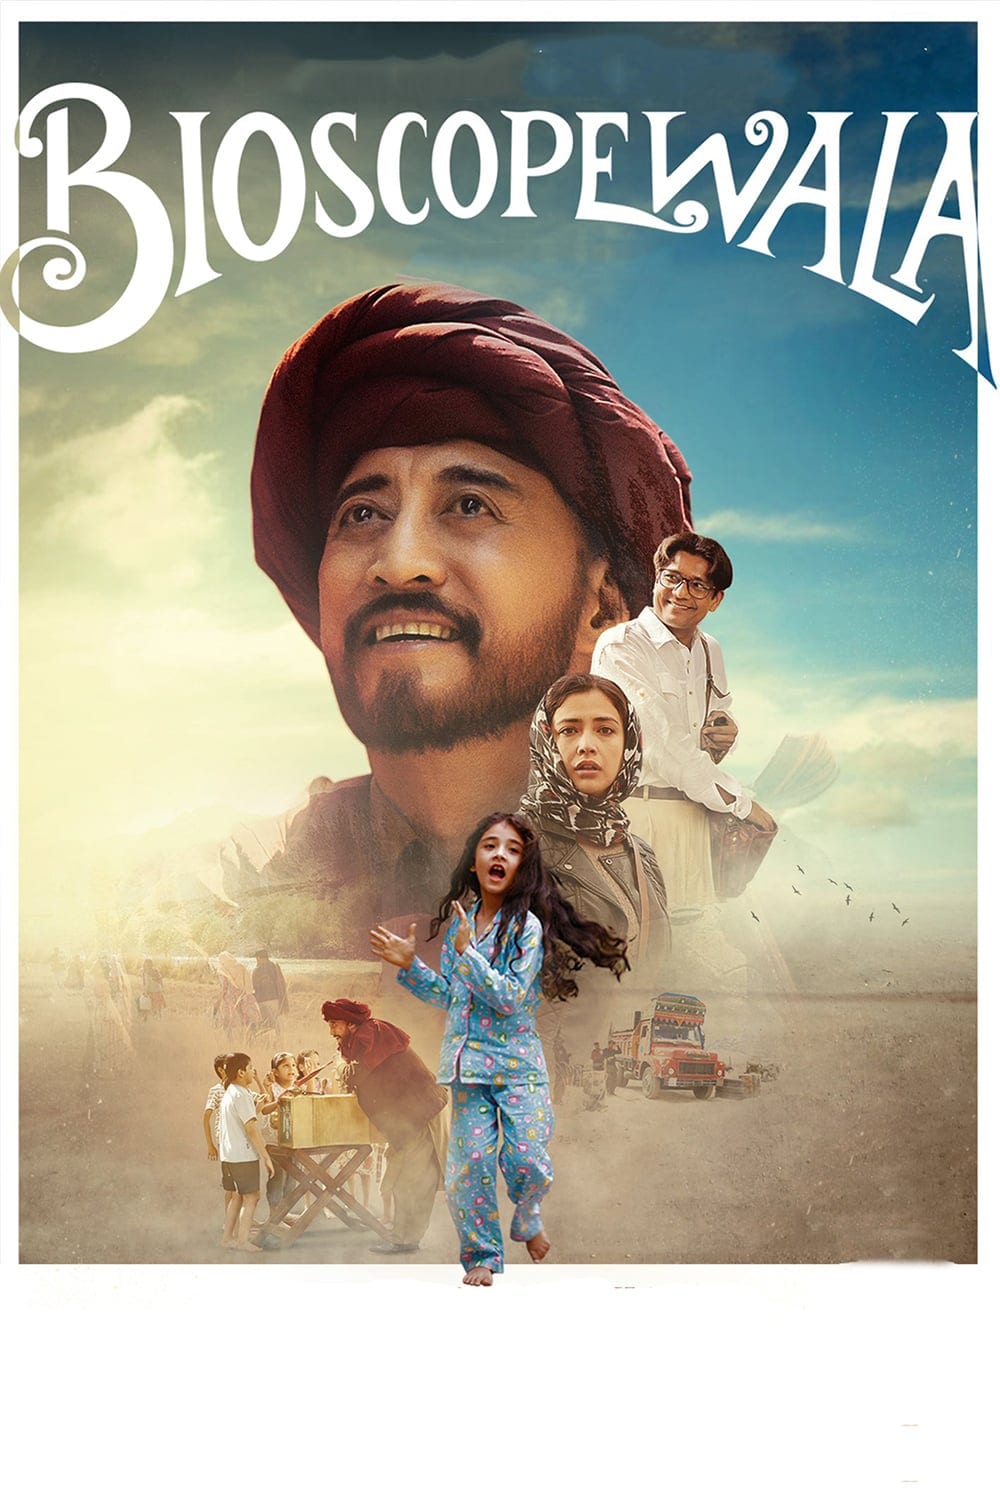 Poster for the movie "Bioscopewala"